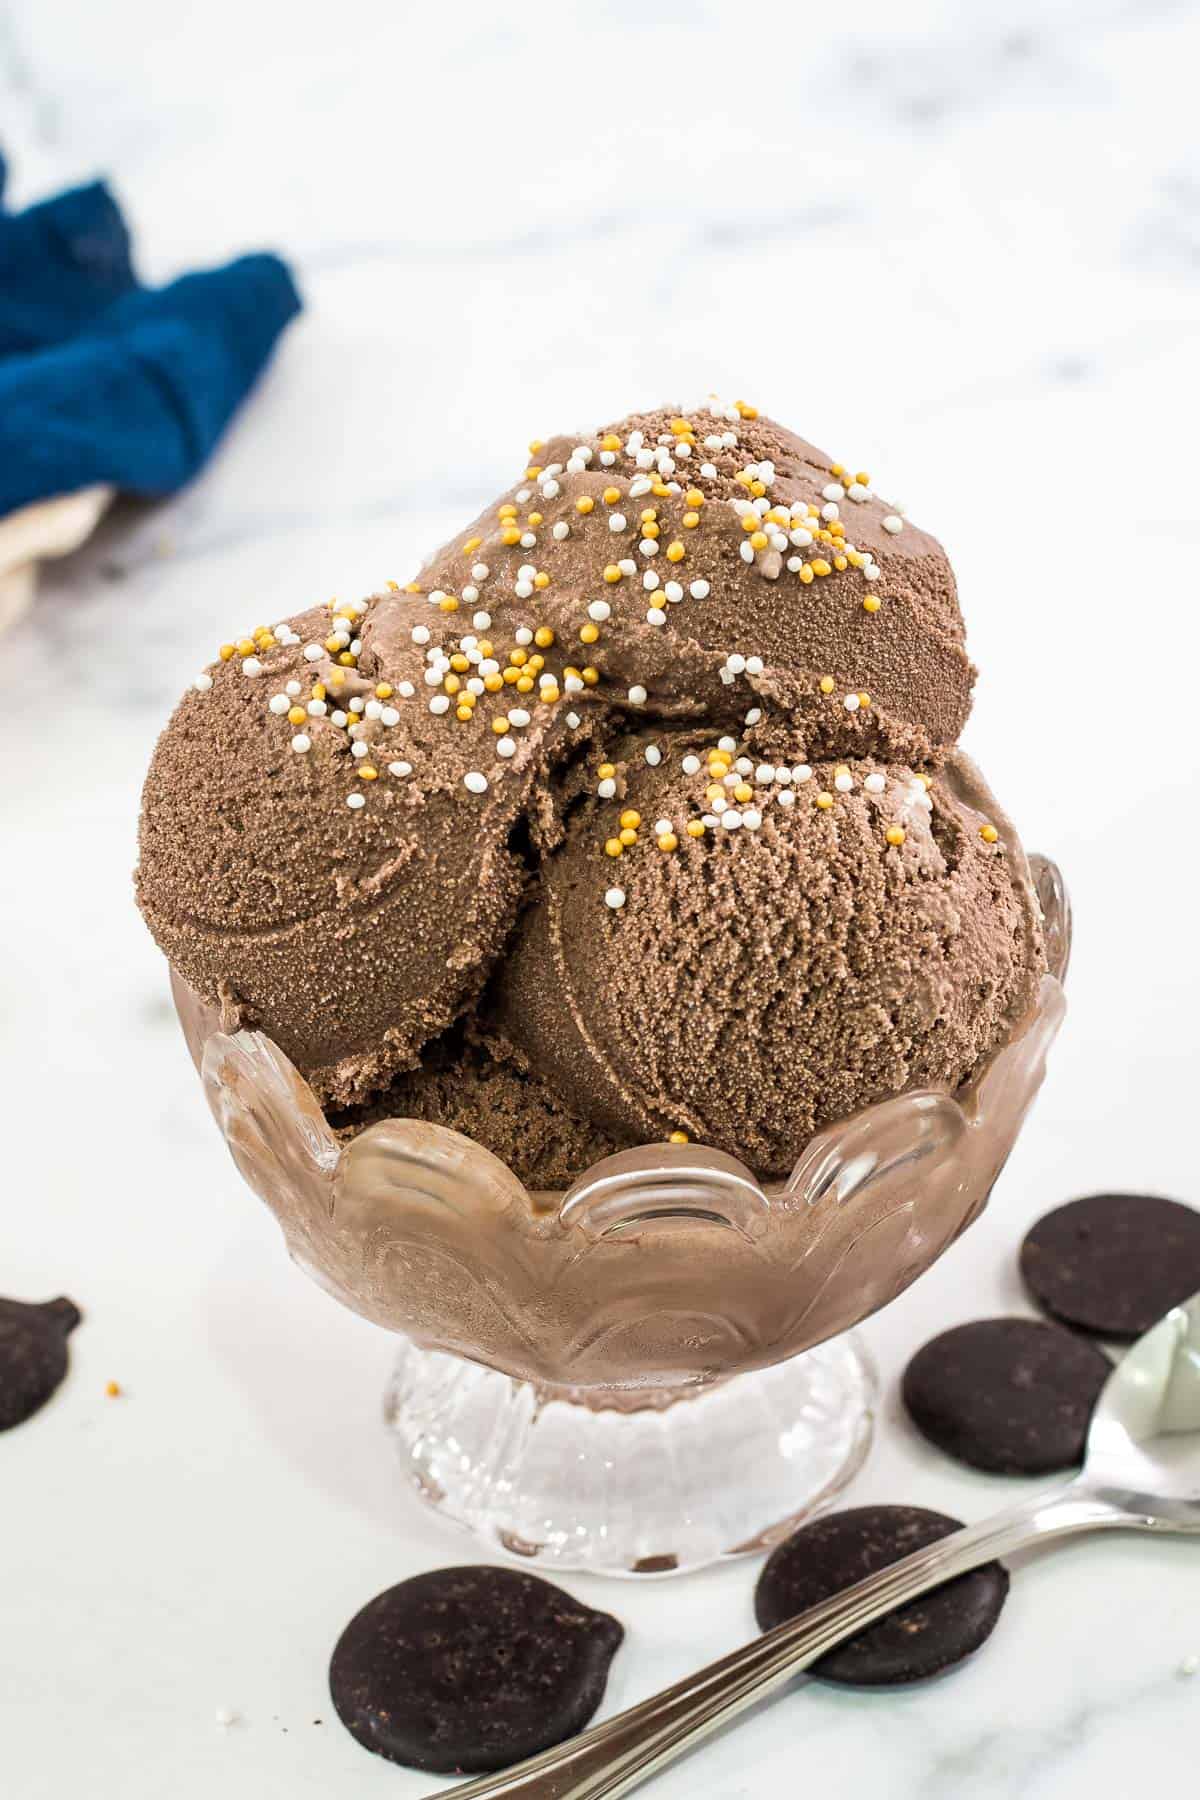 Scoops of chocolate ice cream topped with yellow and white sprinkles